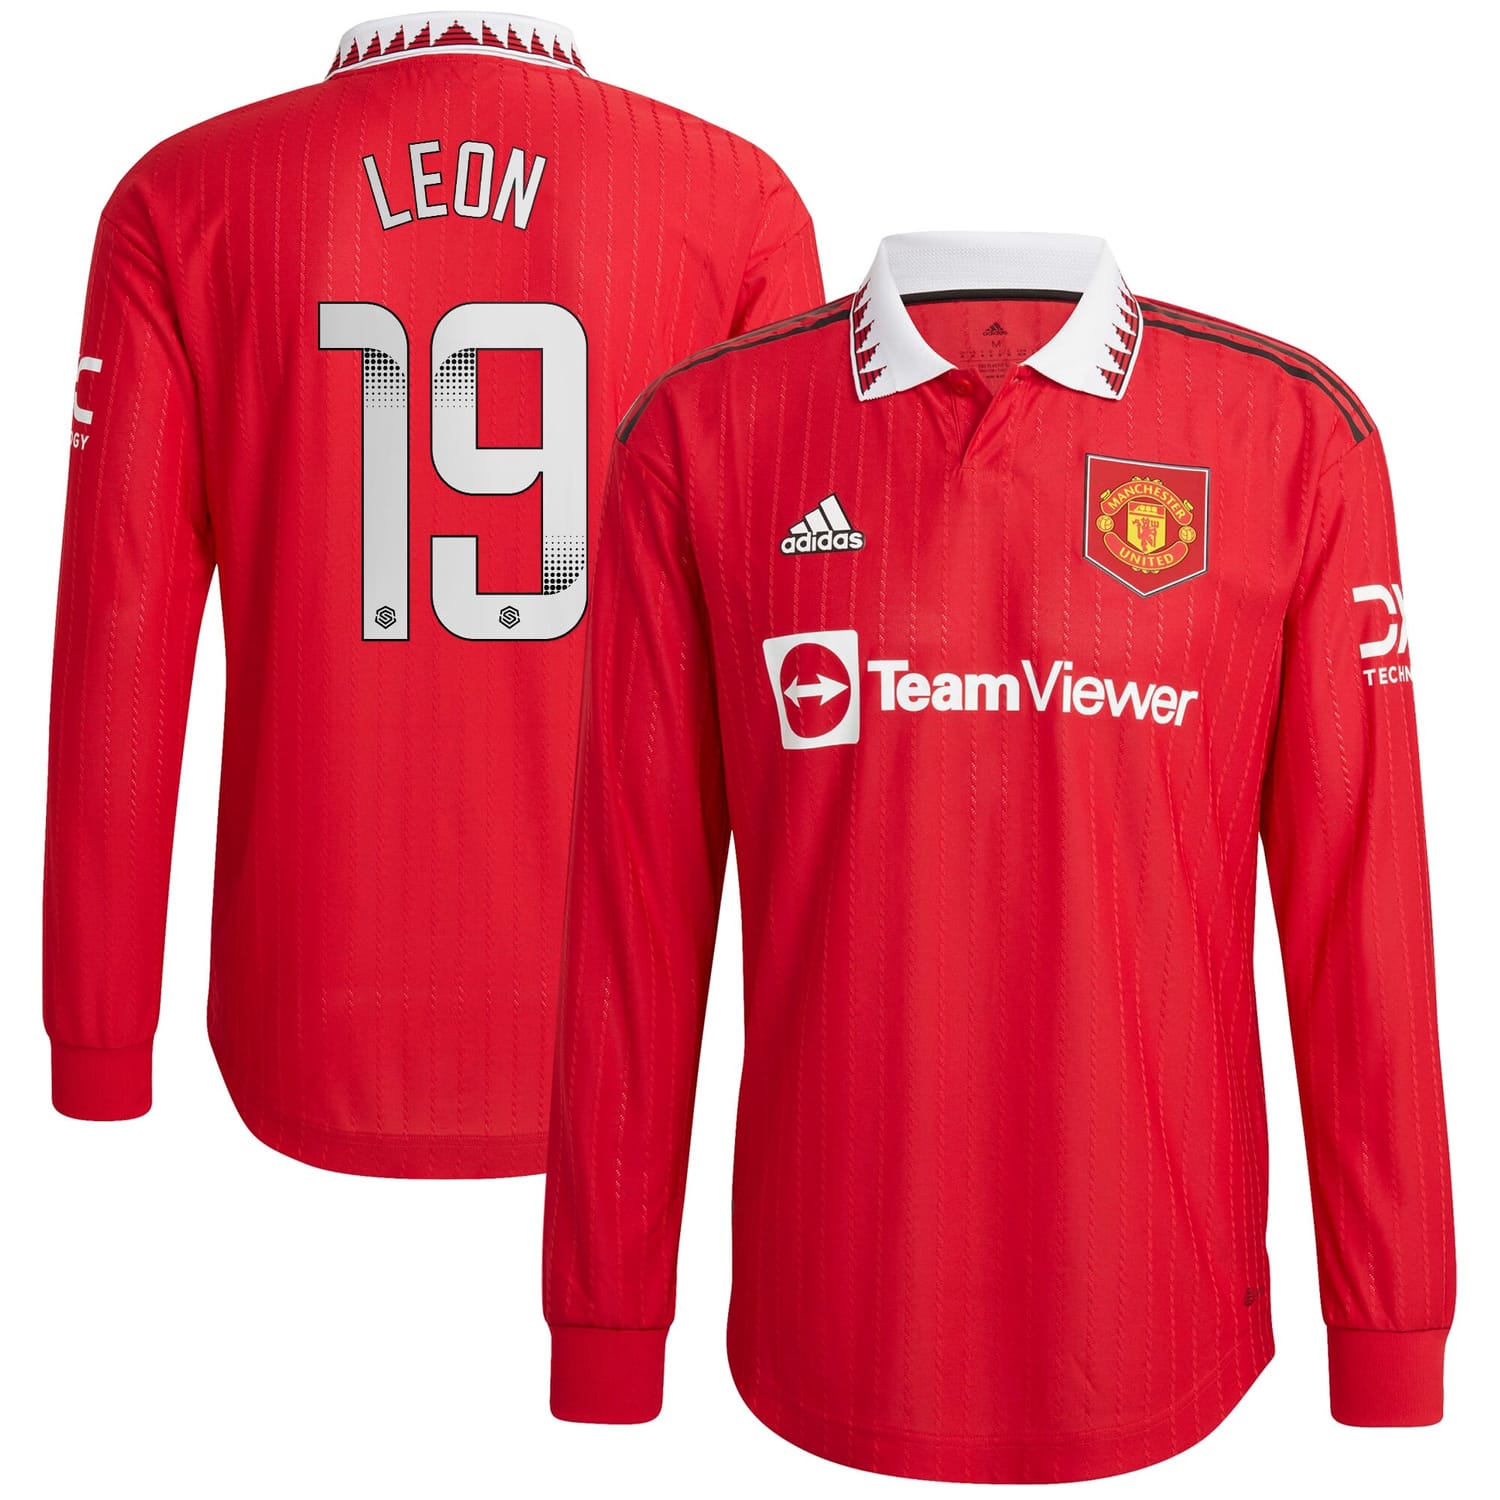 Premier League Manchester United Home WSL Authentic Jersey Shirt Long Sleeve 2022-23 player Adriana Leon 19 printing for Men